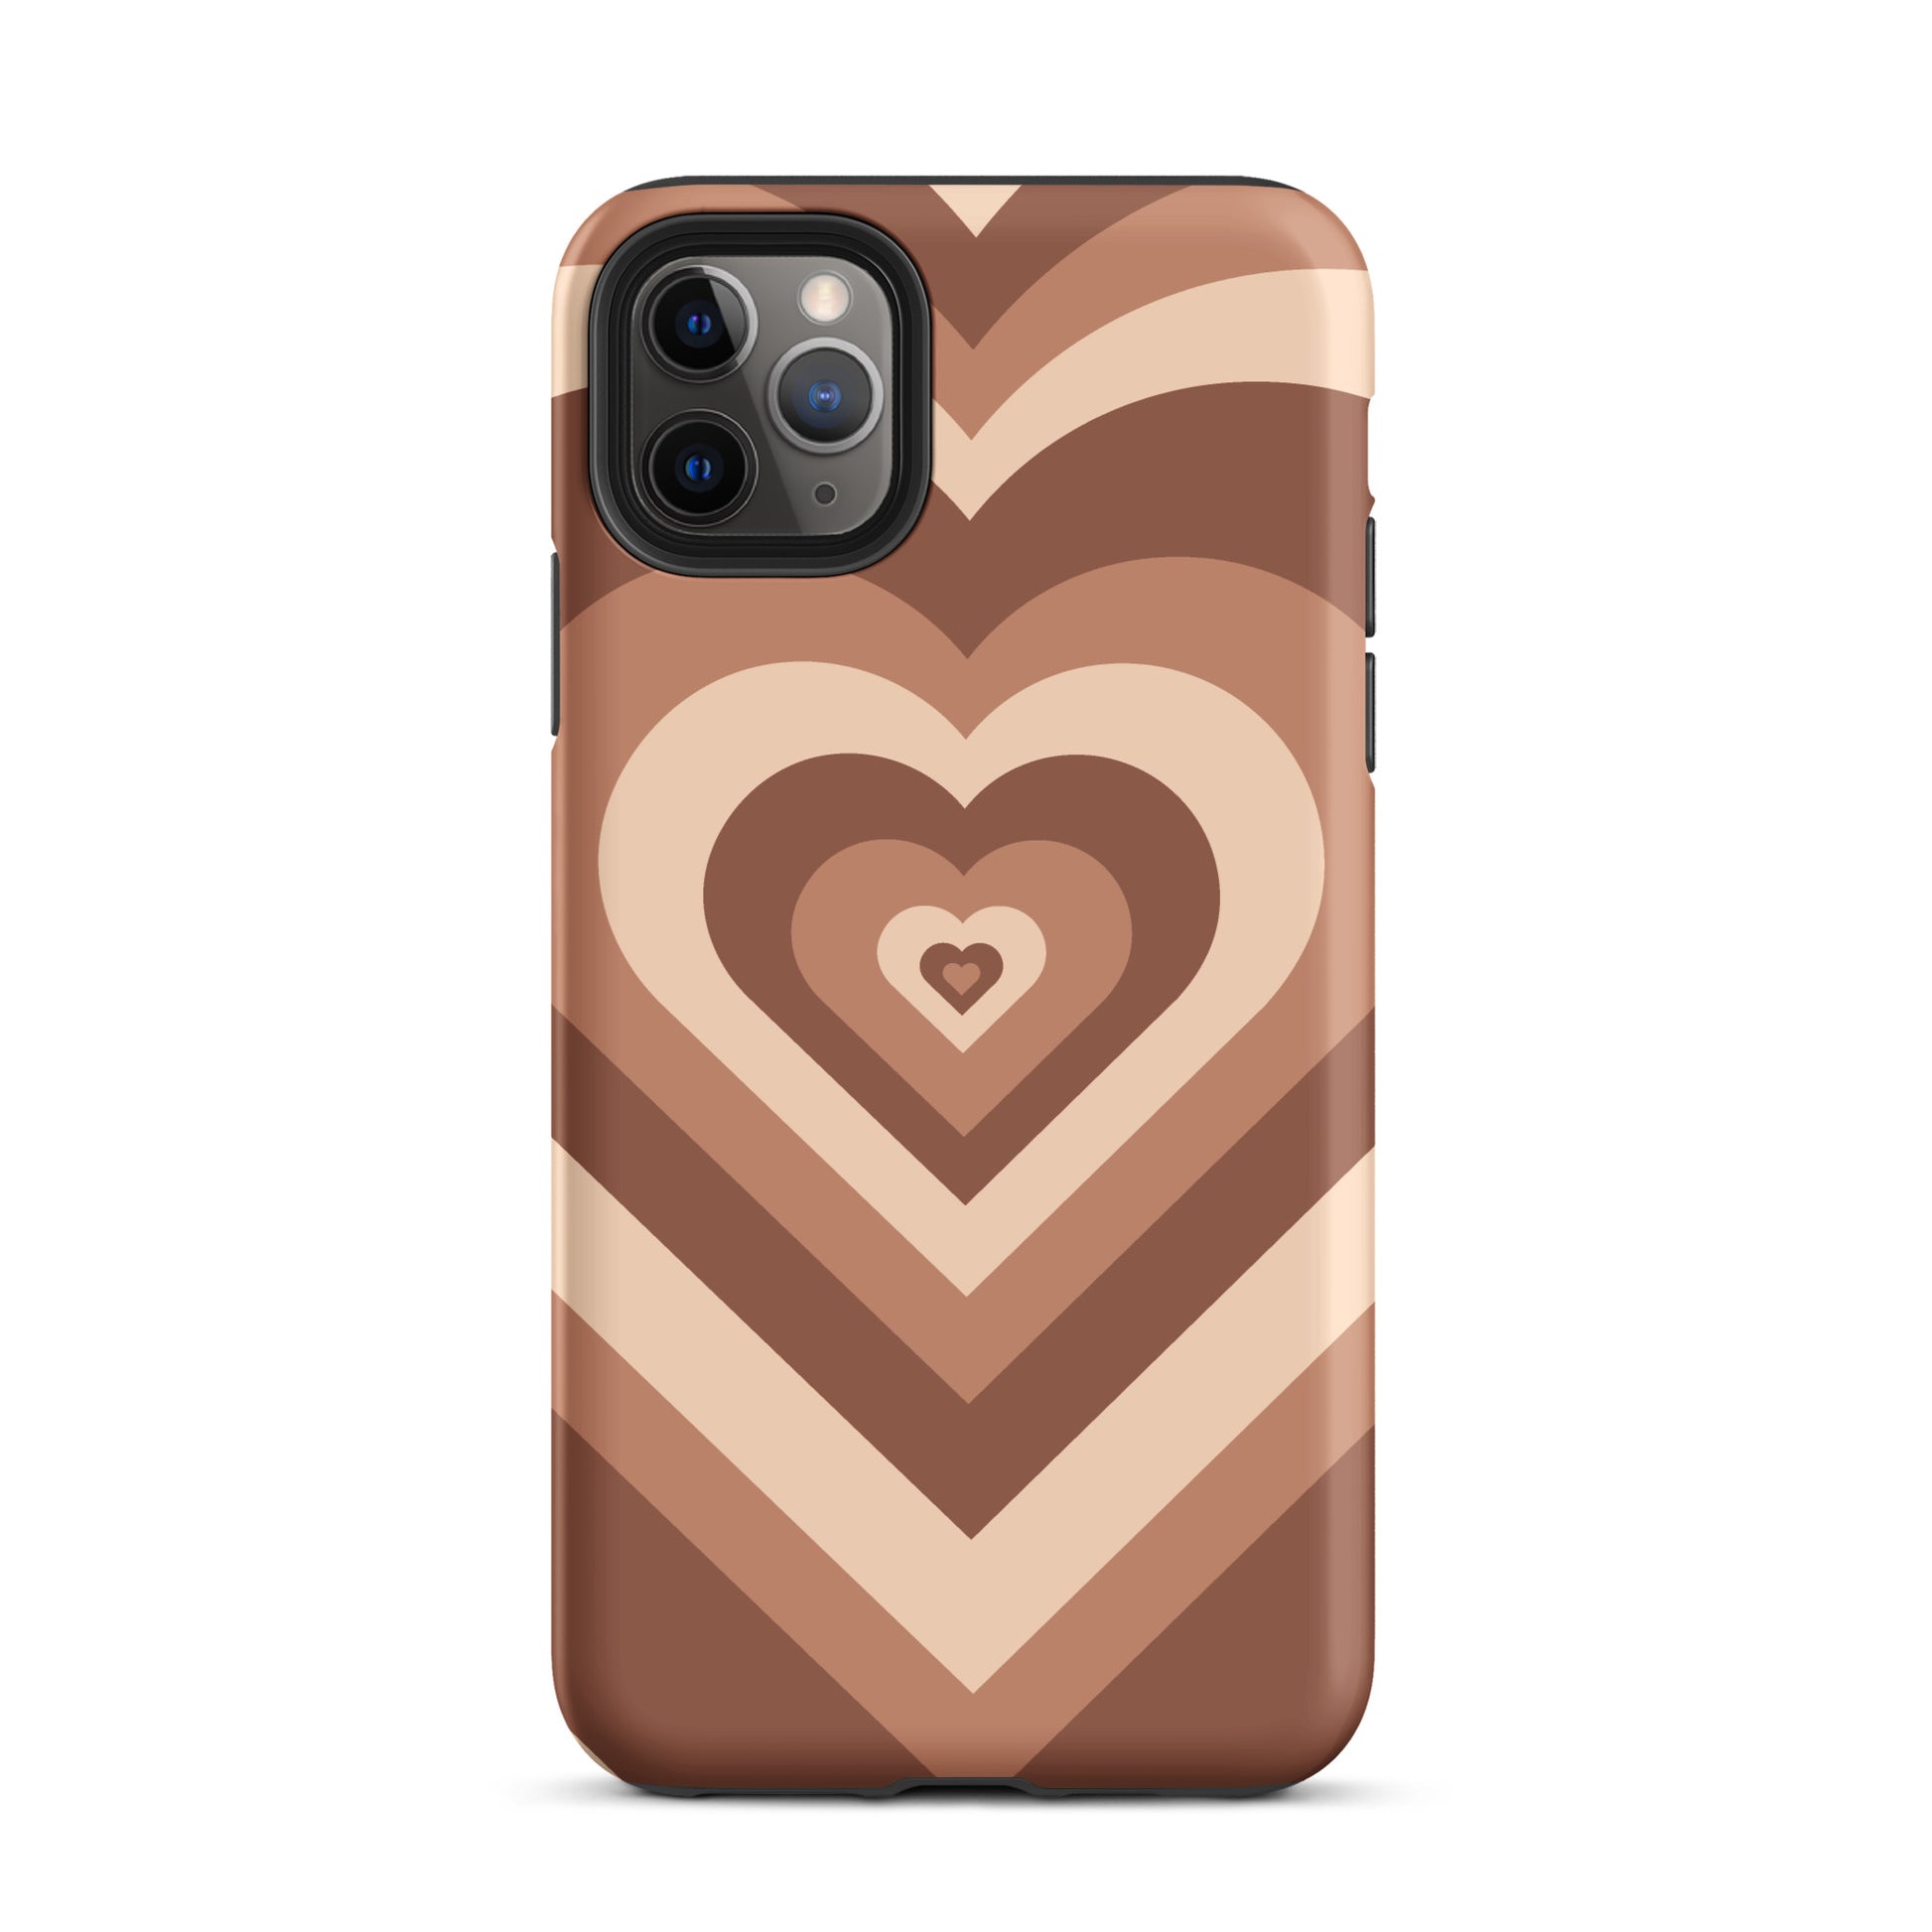 Choco Hearts iPhone Case iPhone 11 Pro Max Matte